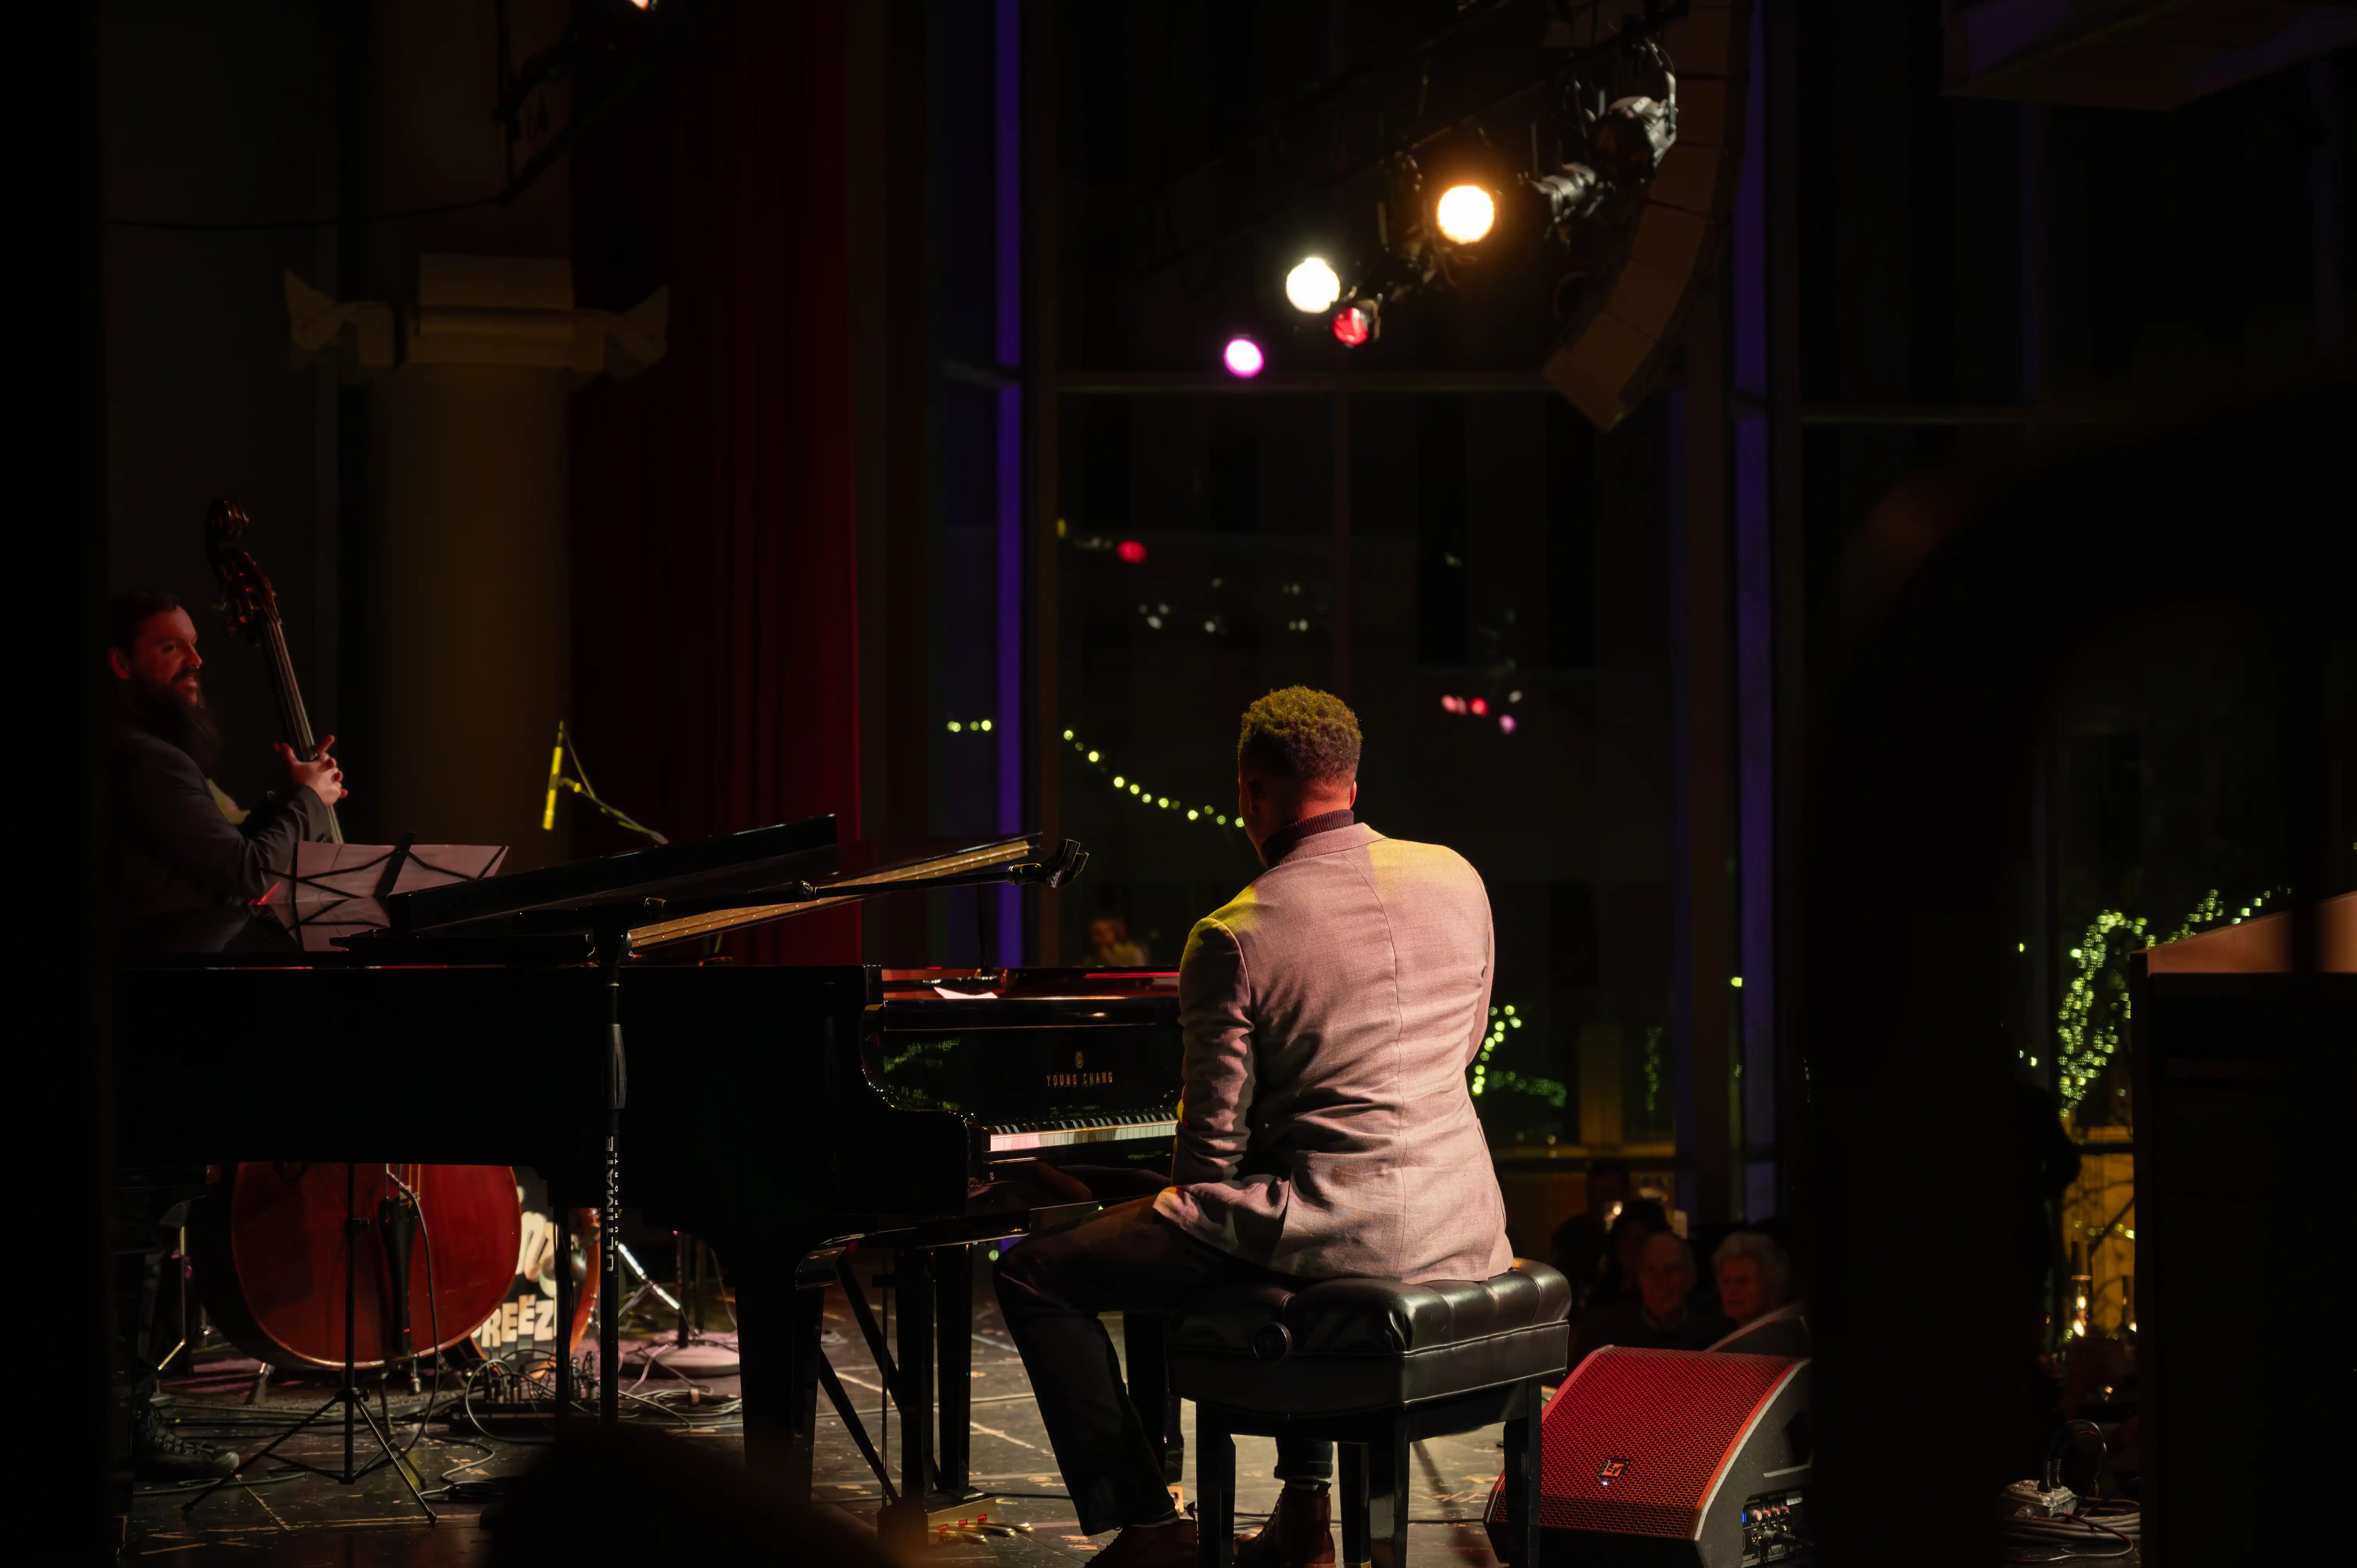 Pianist and musicians performing on stage under dim stage lighting.